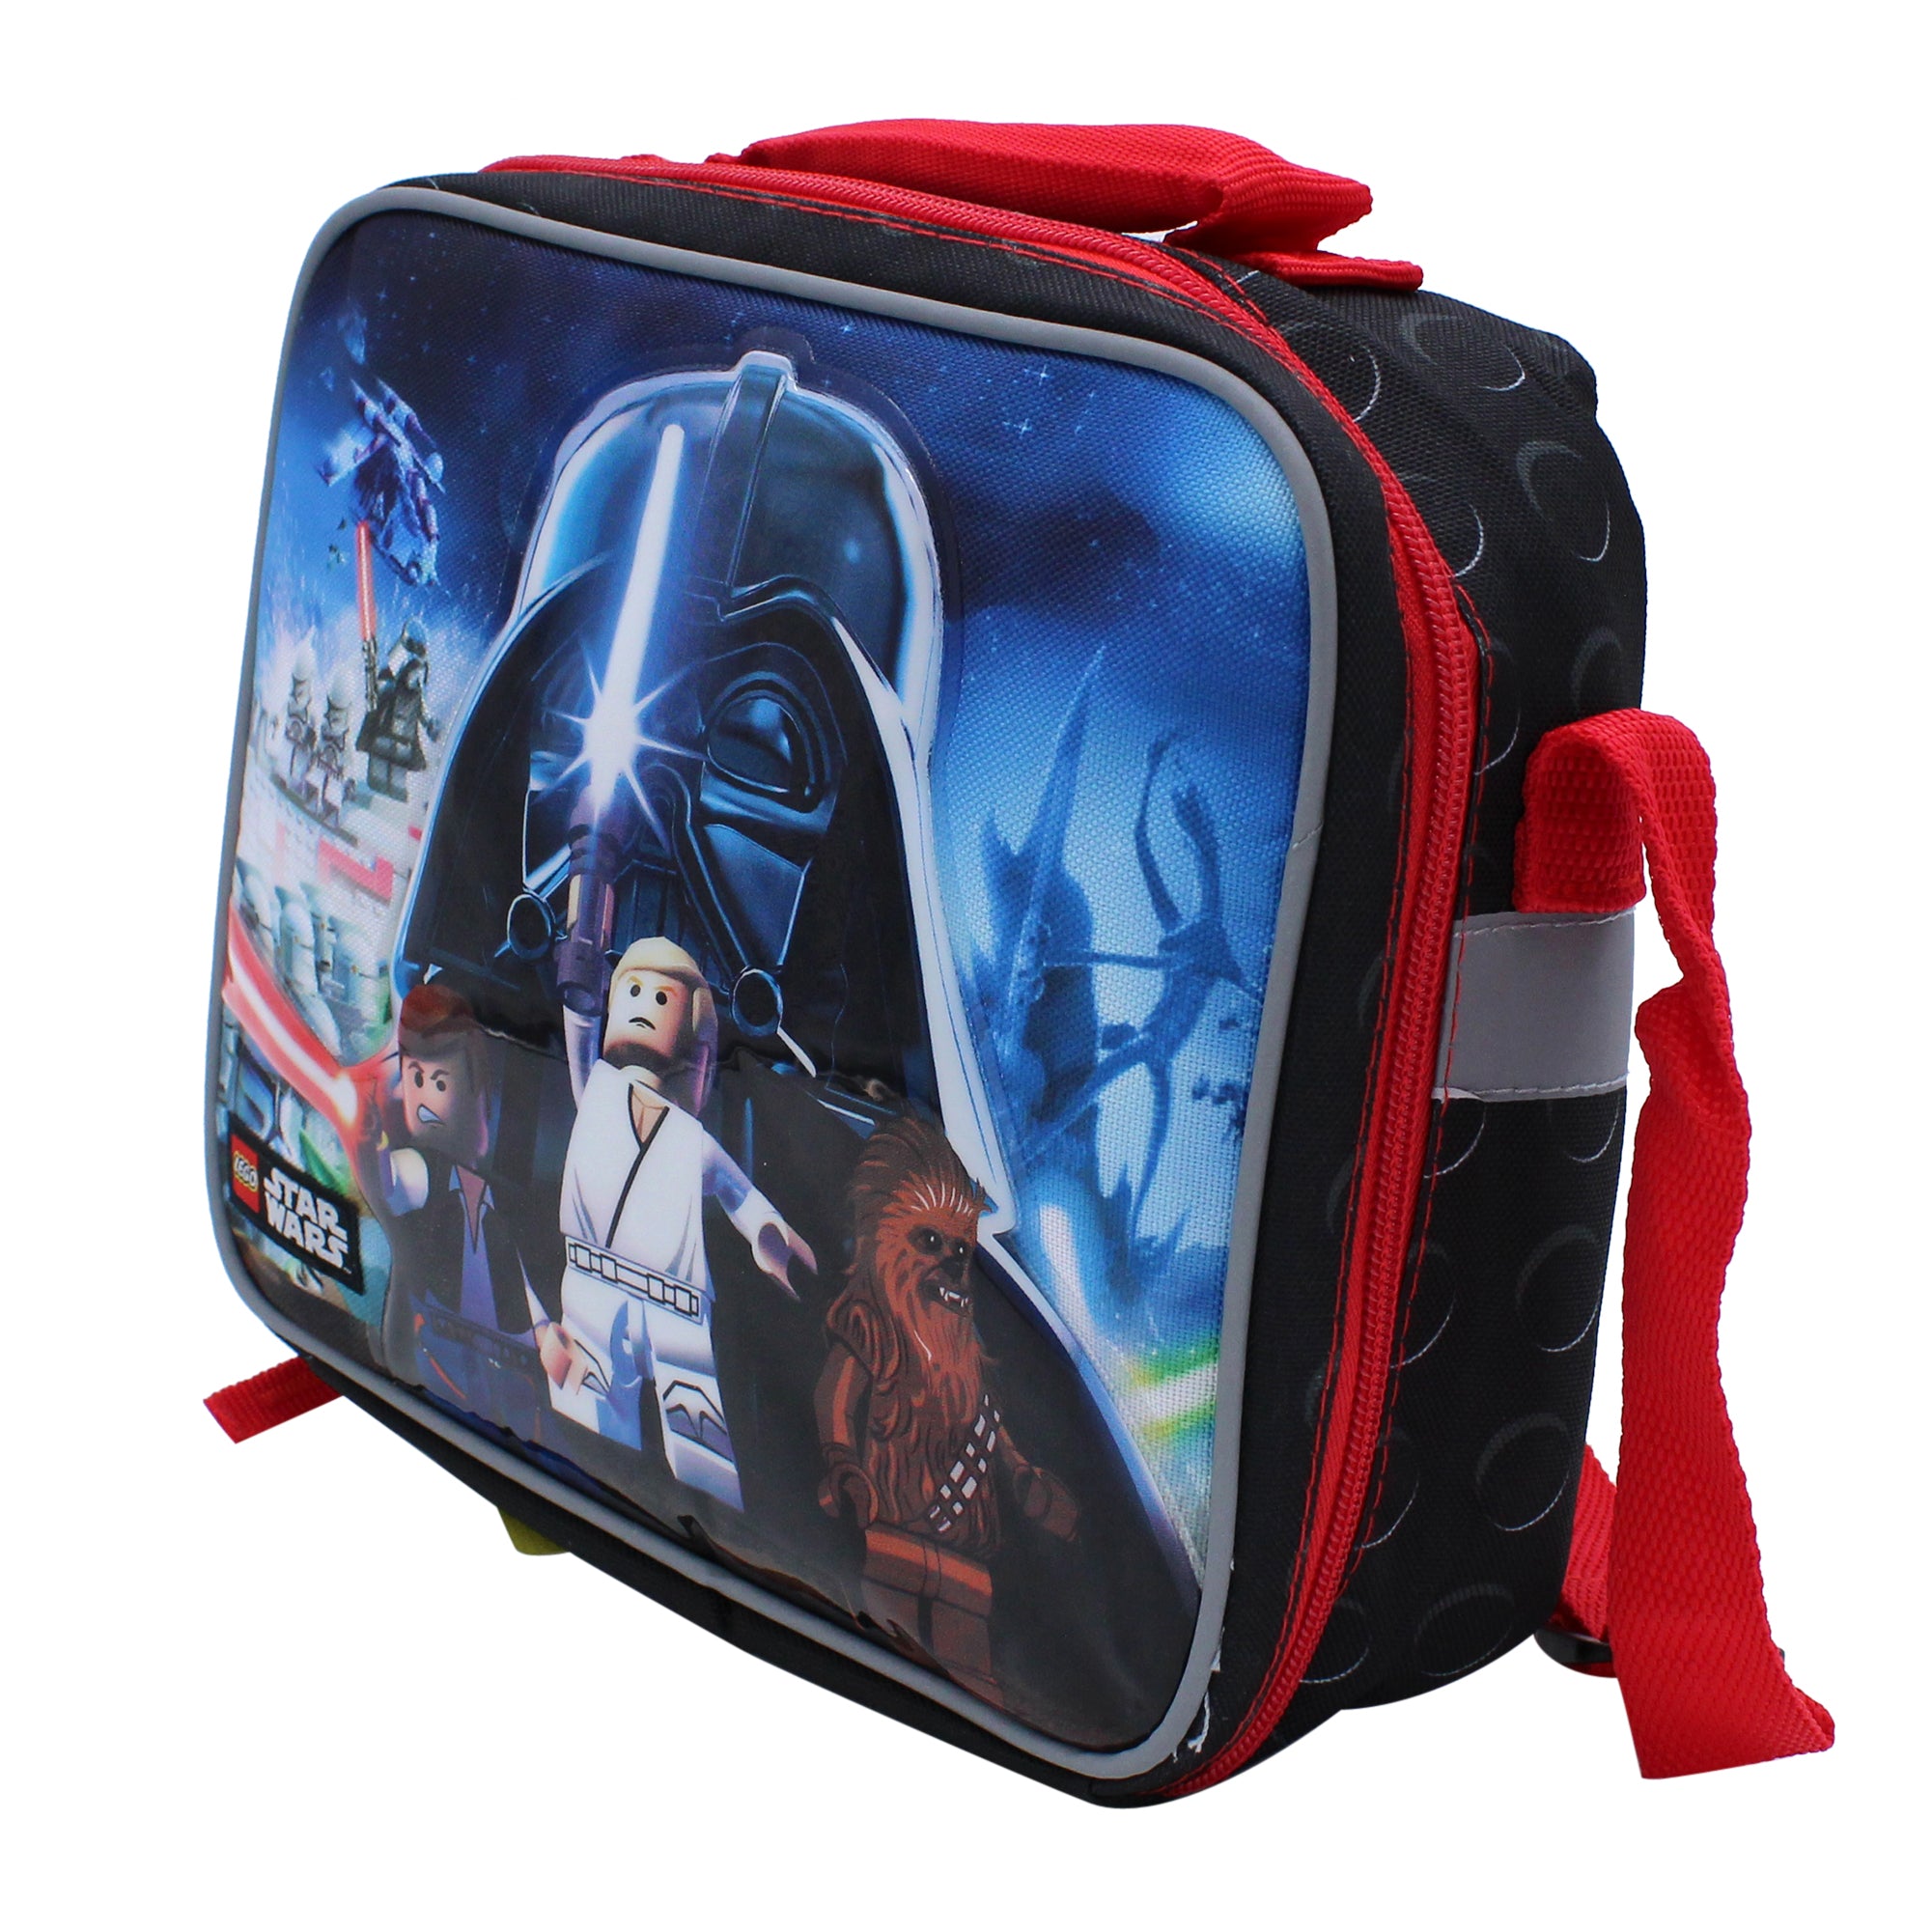 Lego Star Wars with Darth Vader Face Insulated Kids Lunch Bag for School or  Travel